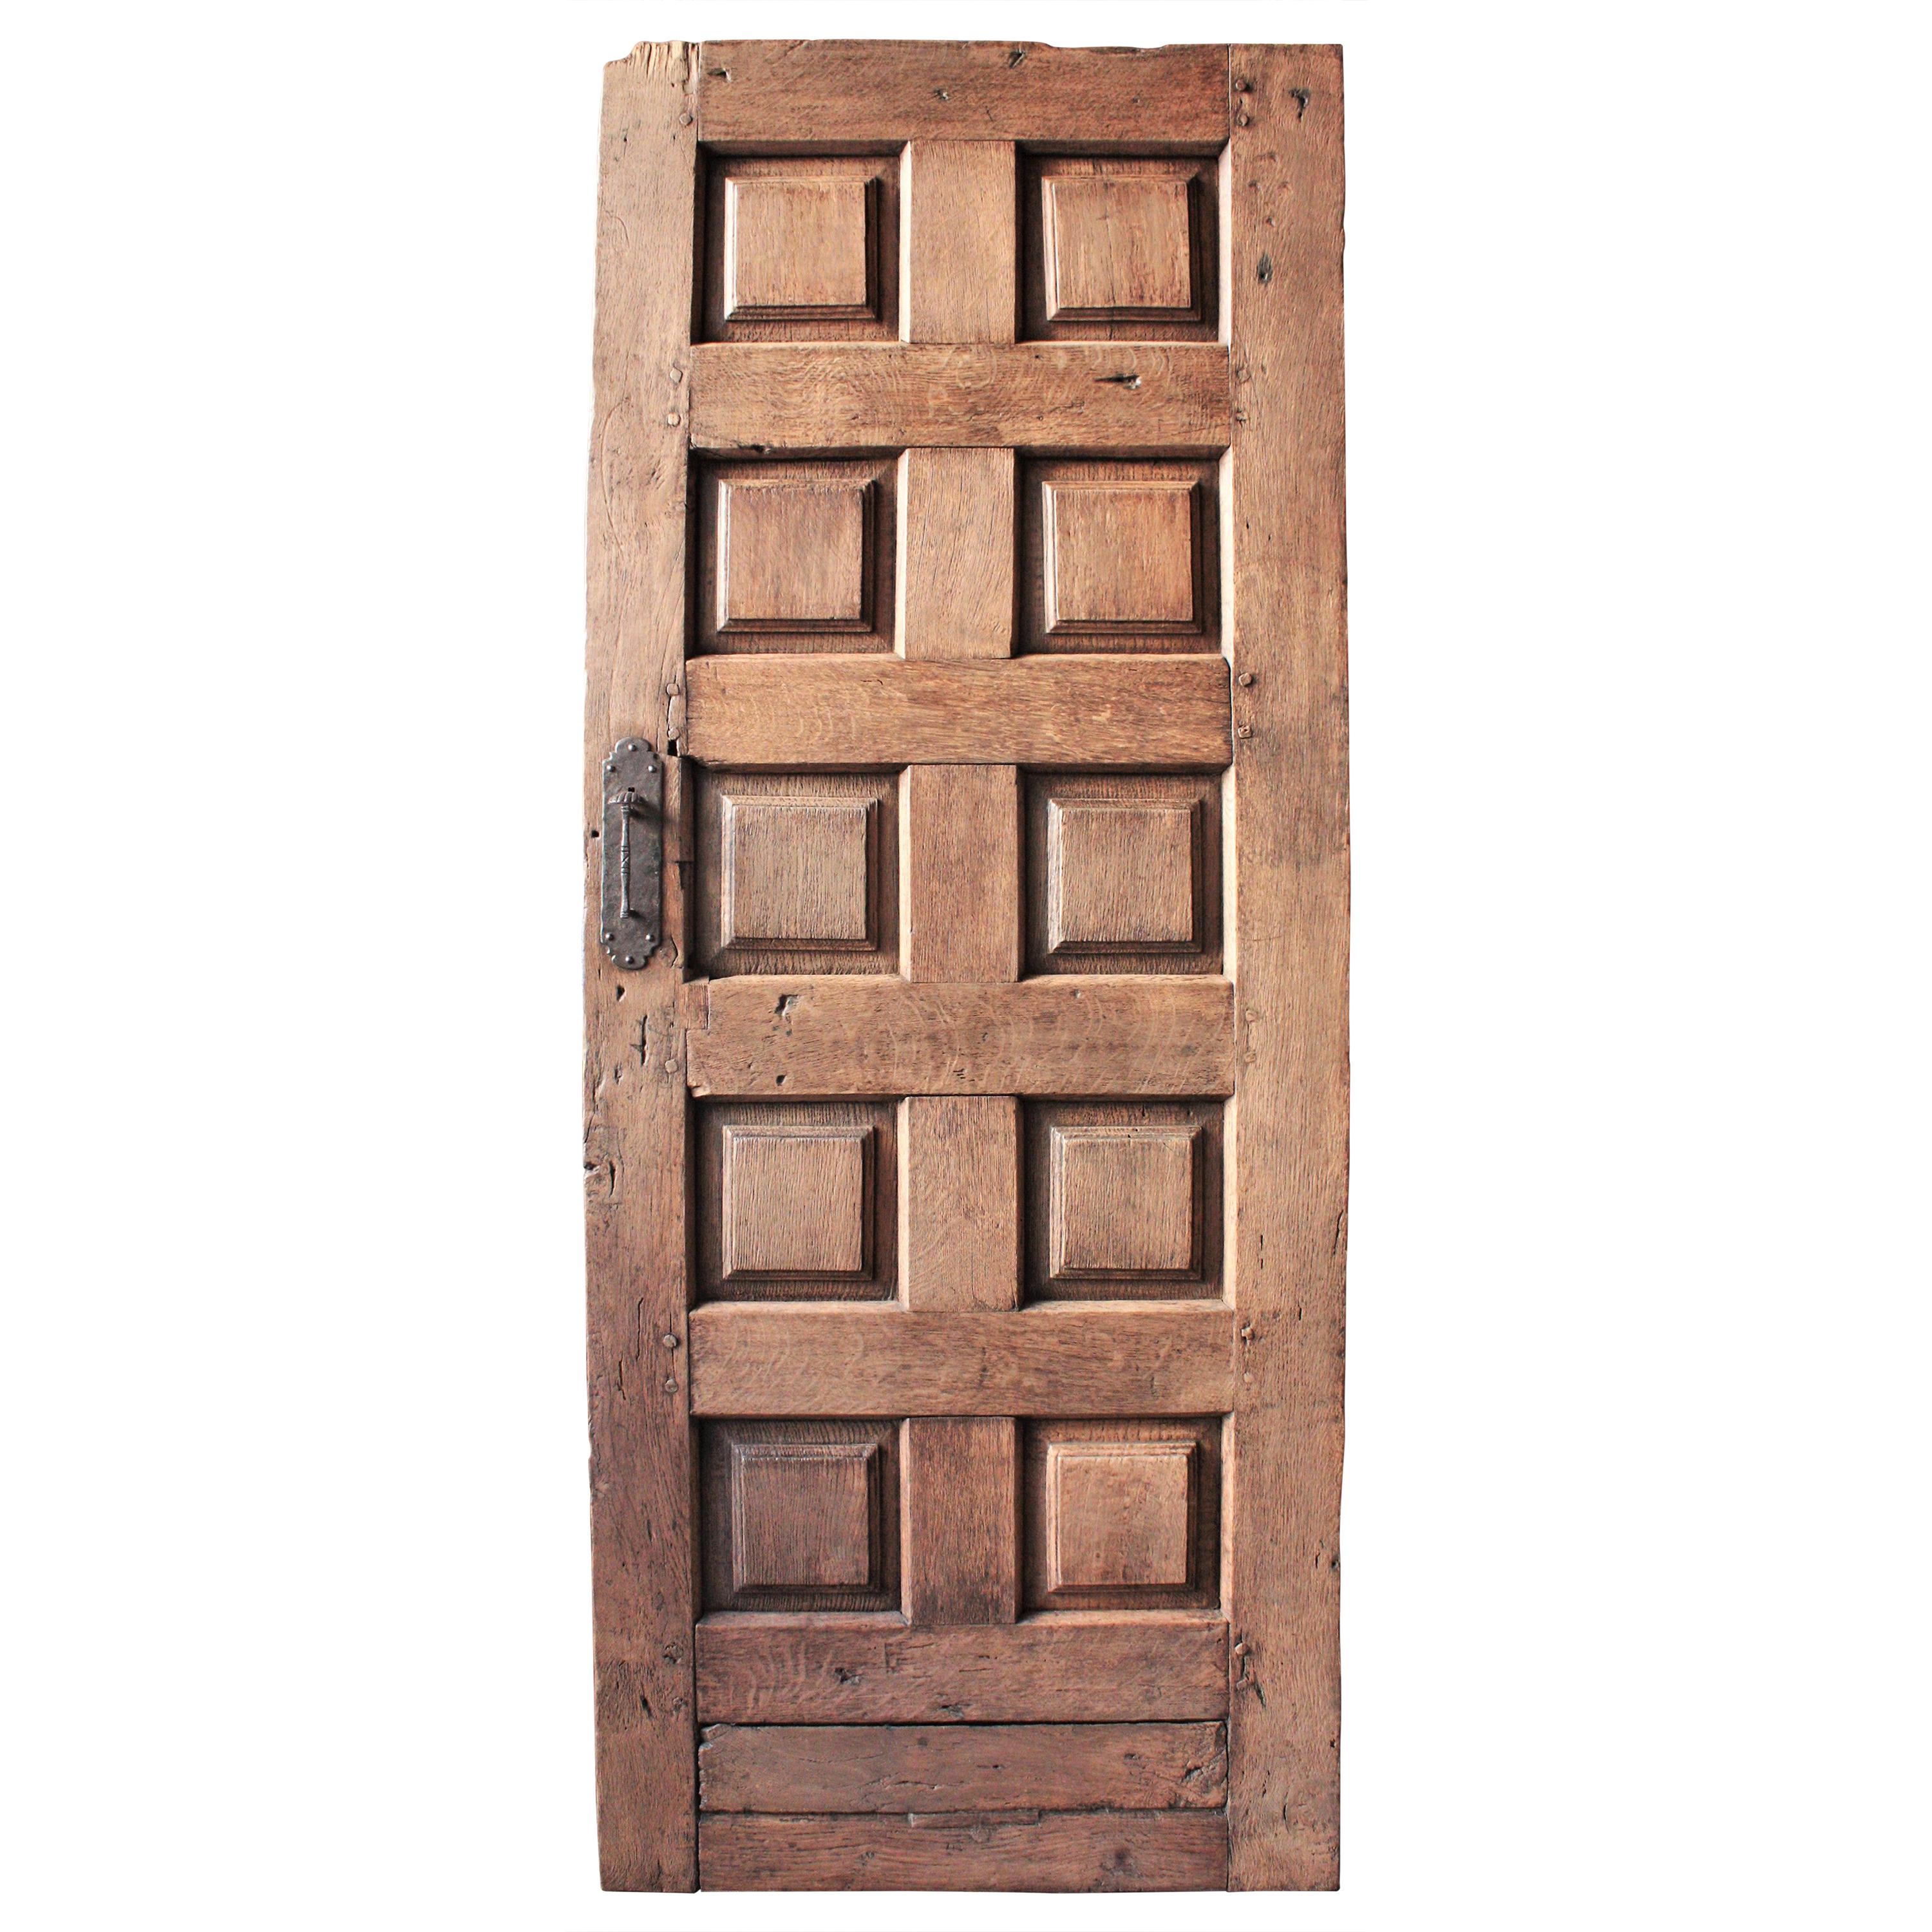 Spanish Rustic Door with Original Hand Forged Iron Pull